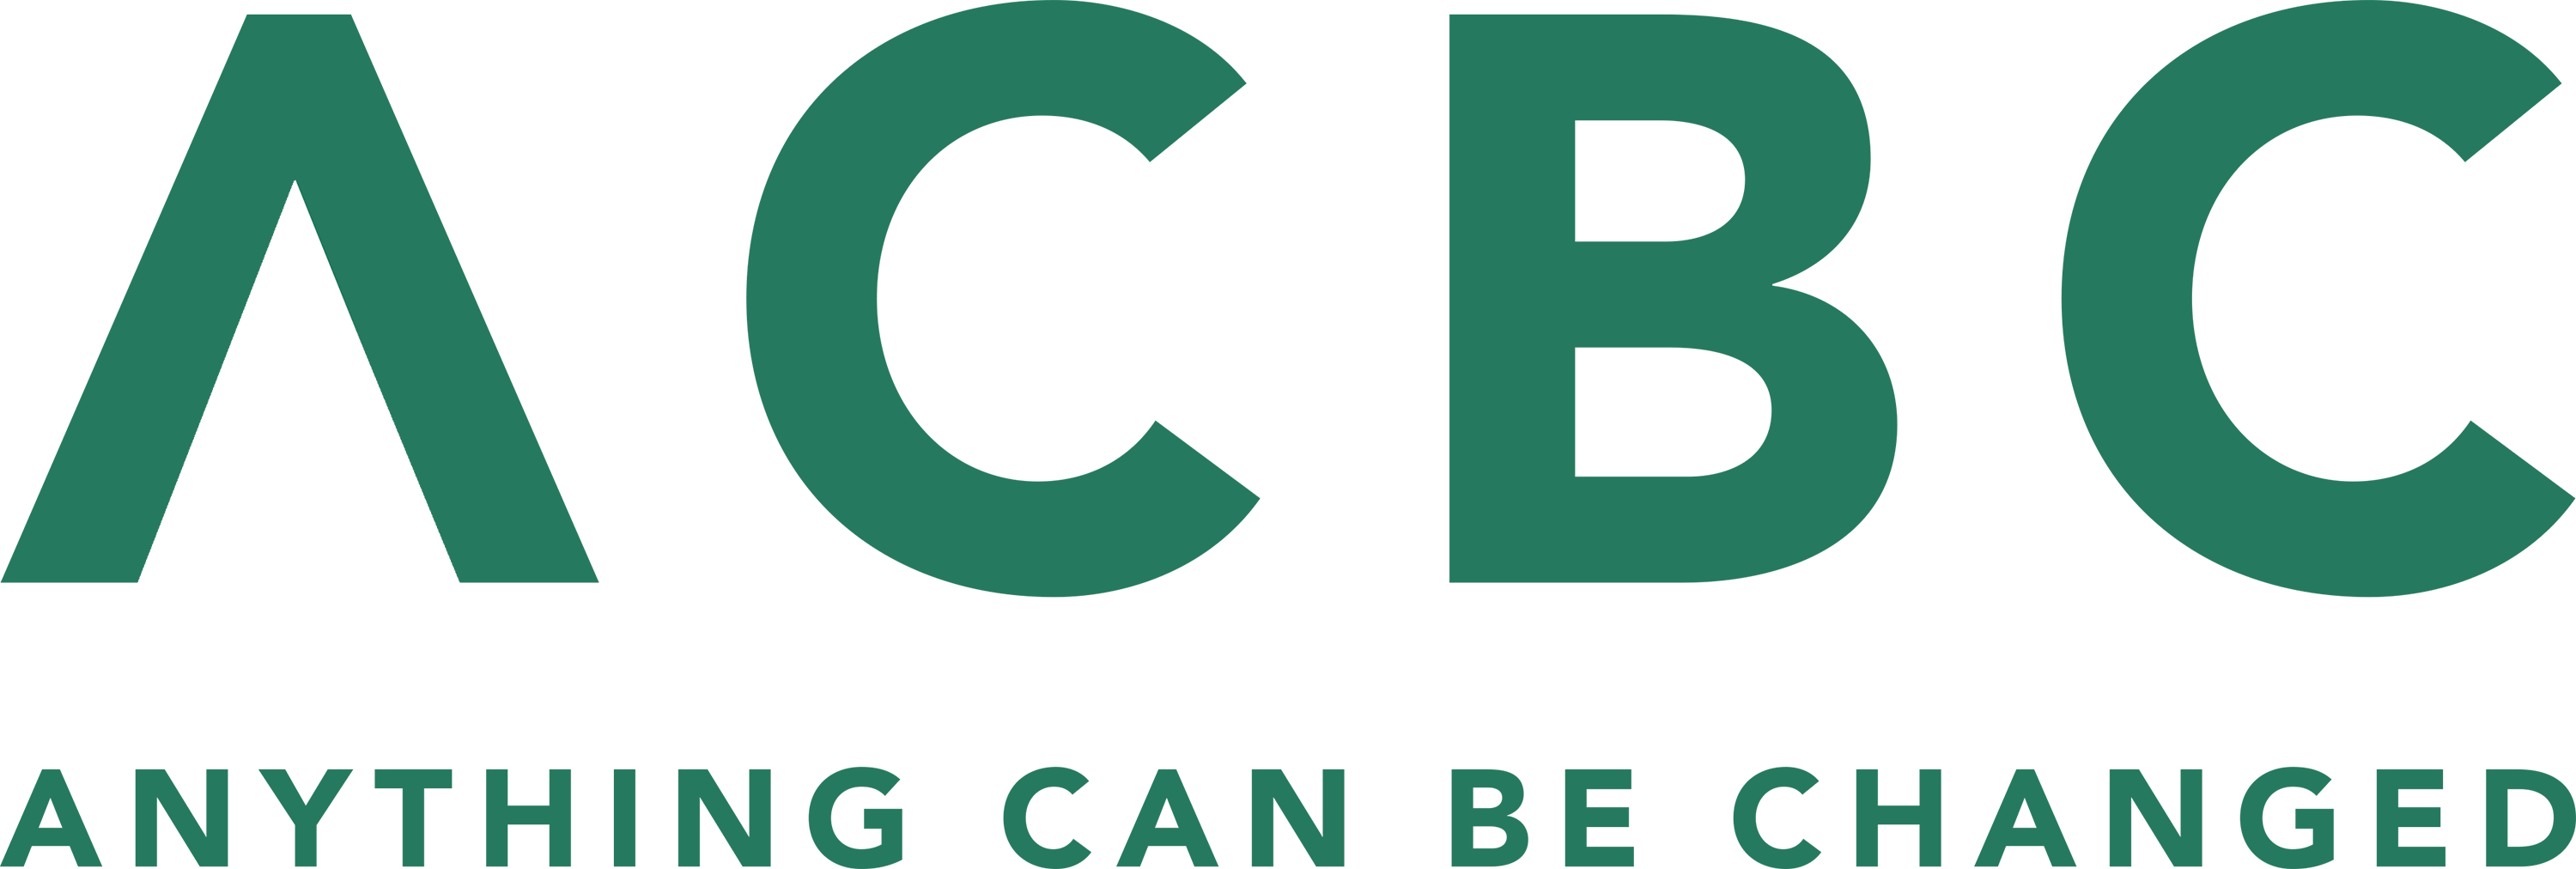 acbc anything can be changed logo